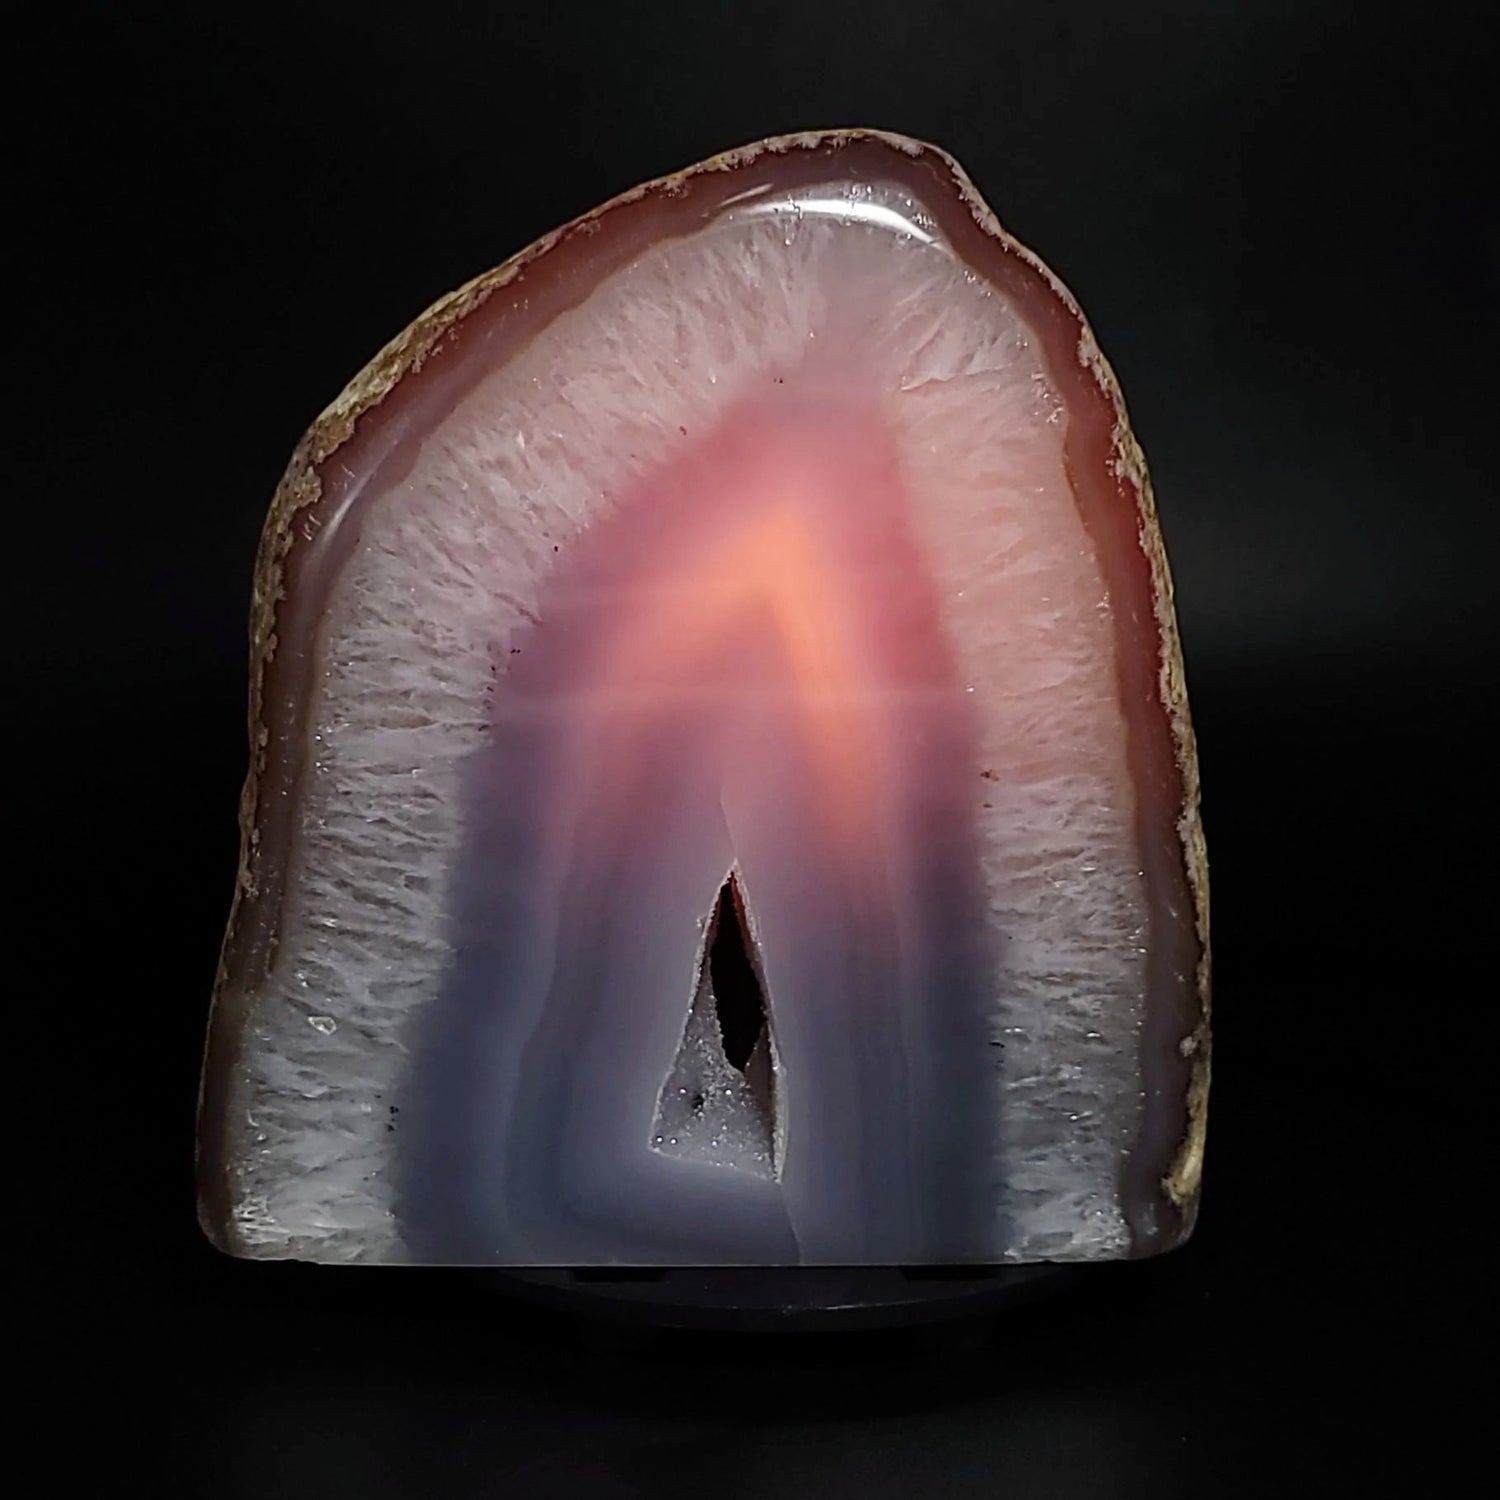 Agate Lamp Polished Agate Light - Elevated Metaphysical